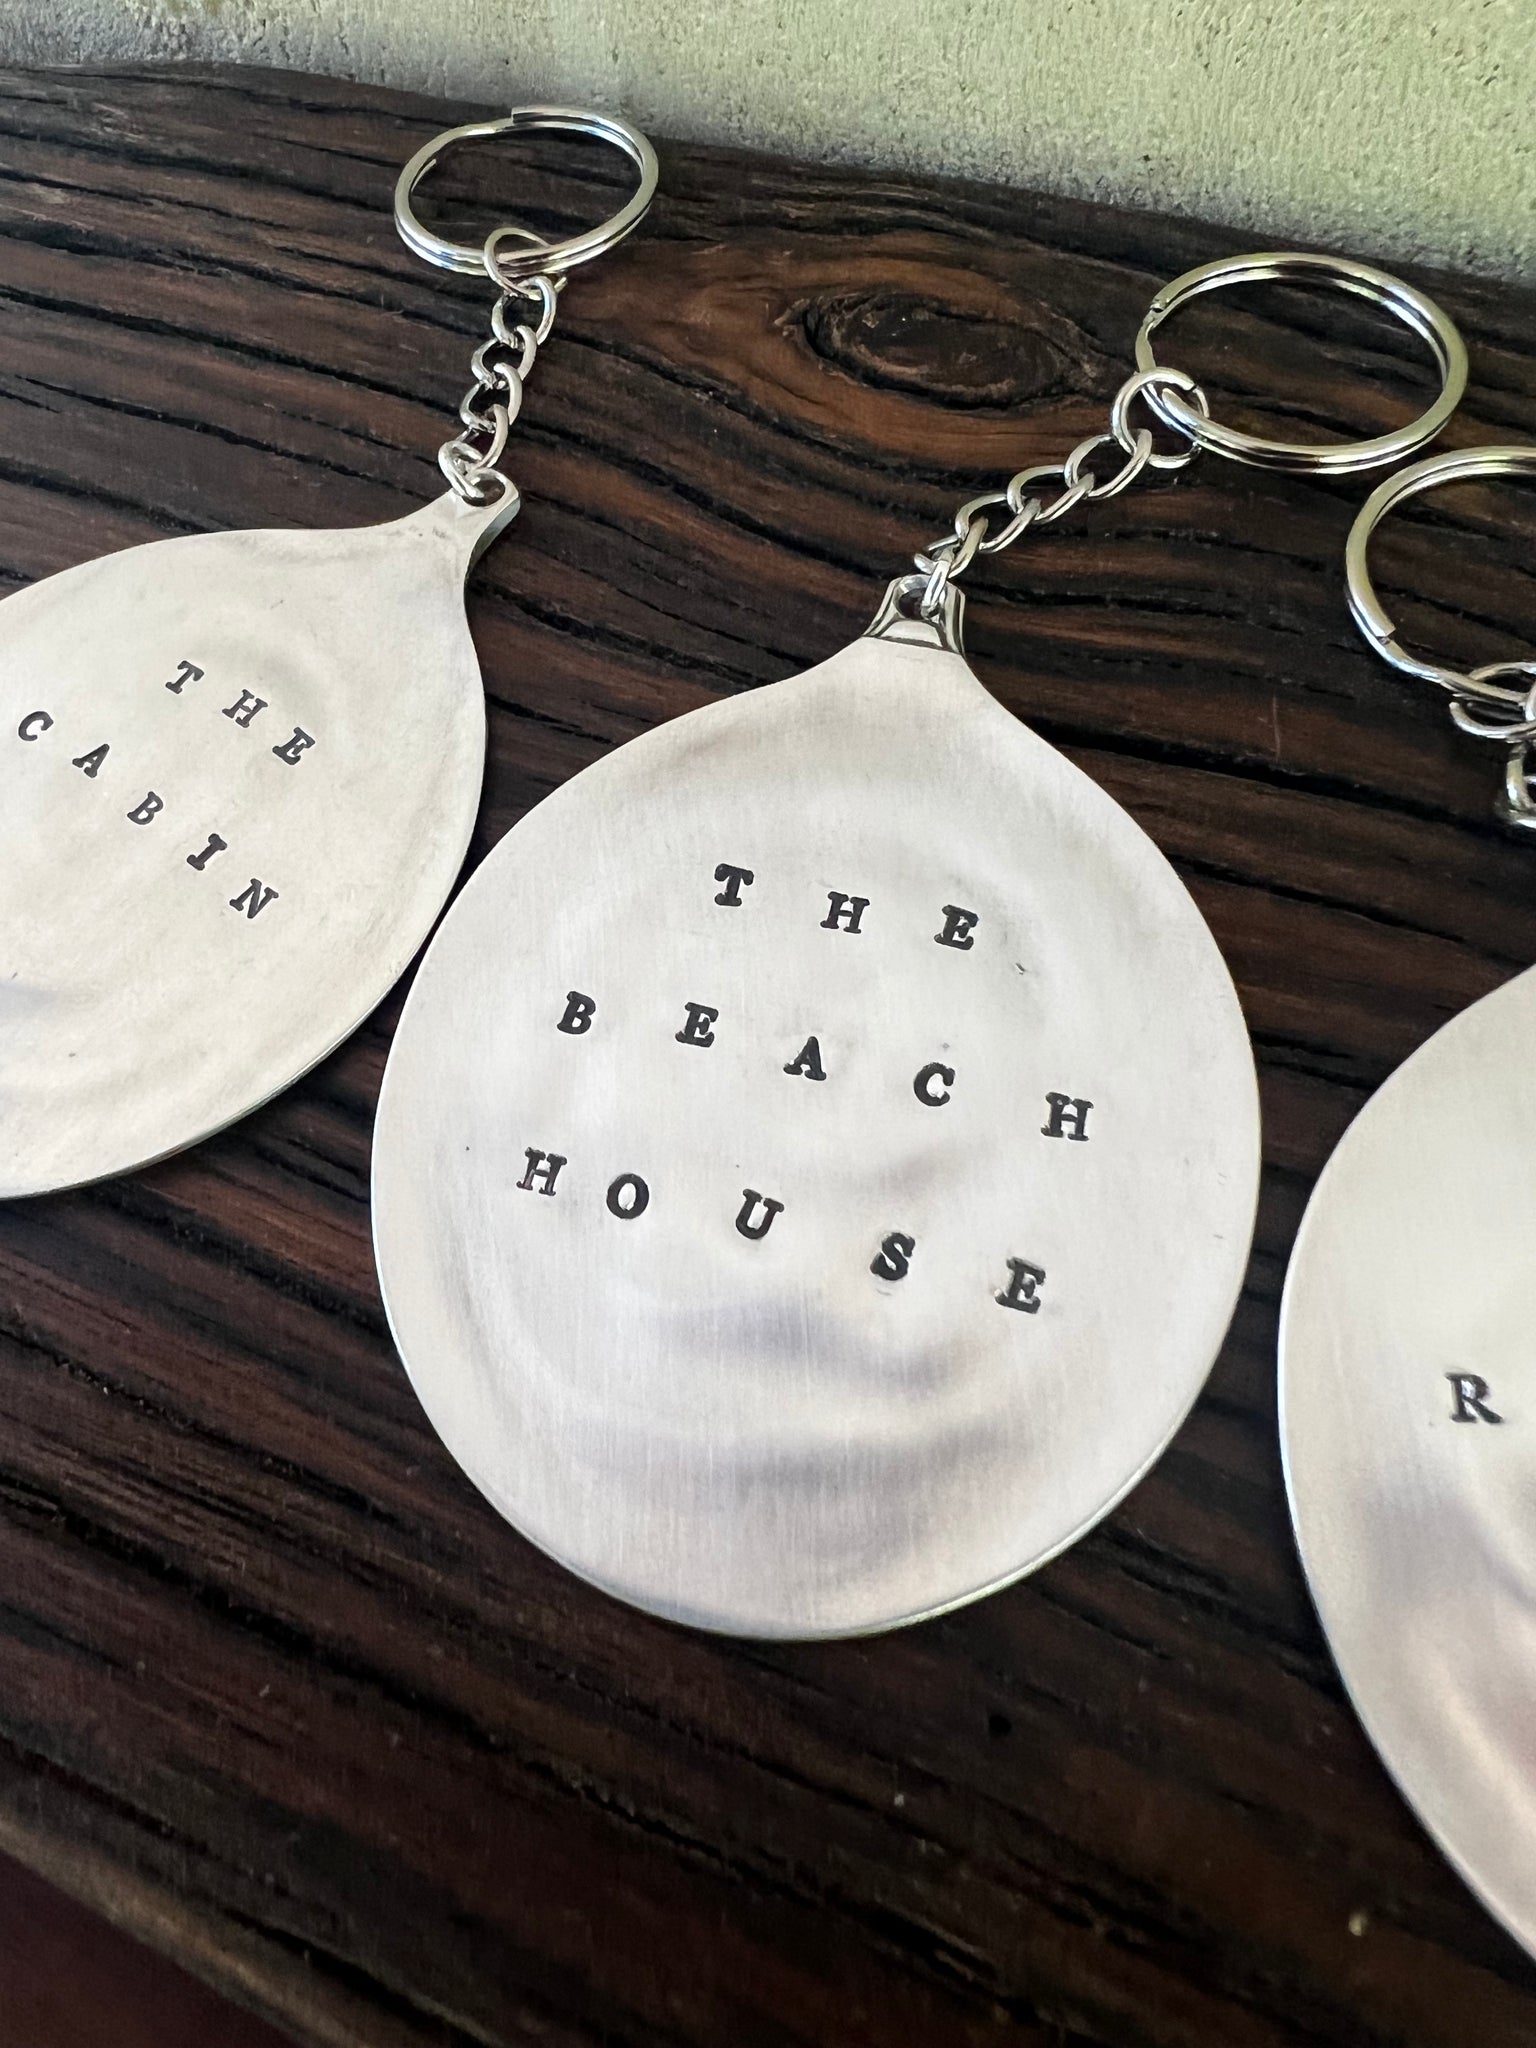 Keyrings - letter-stamped ~ the cabin ~ the beach house ~ the retreat